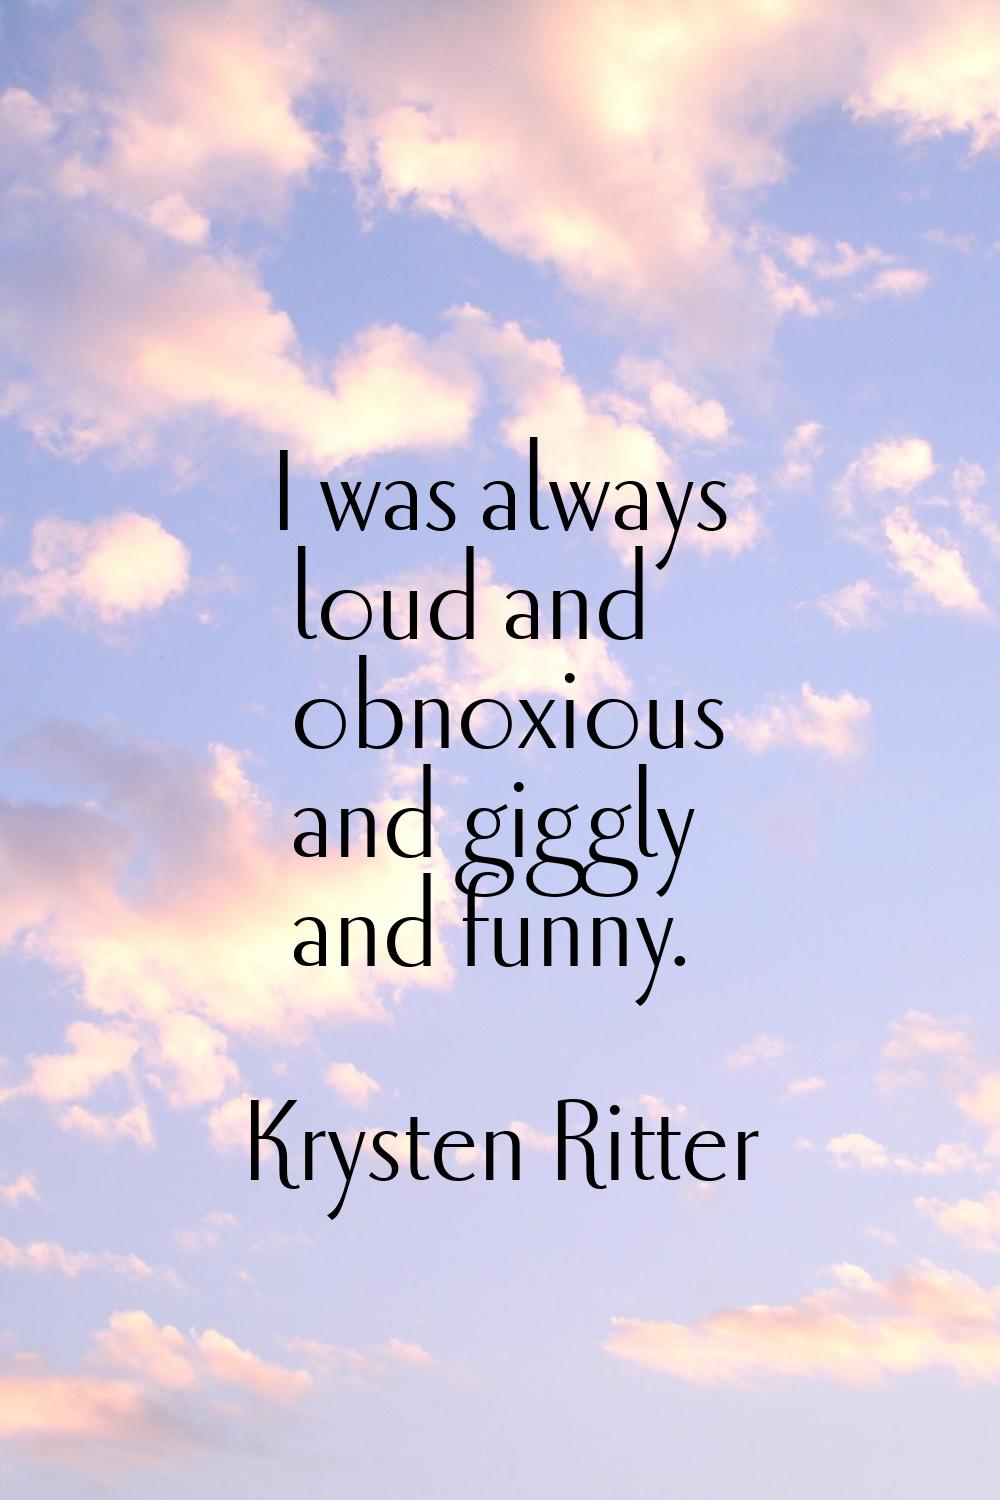 I was always loud and obnoxious and giggly and funny.